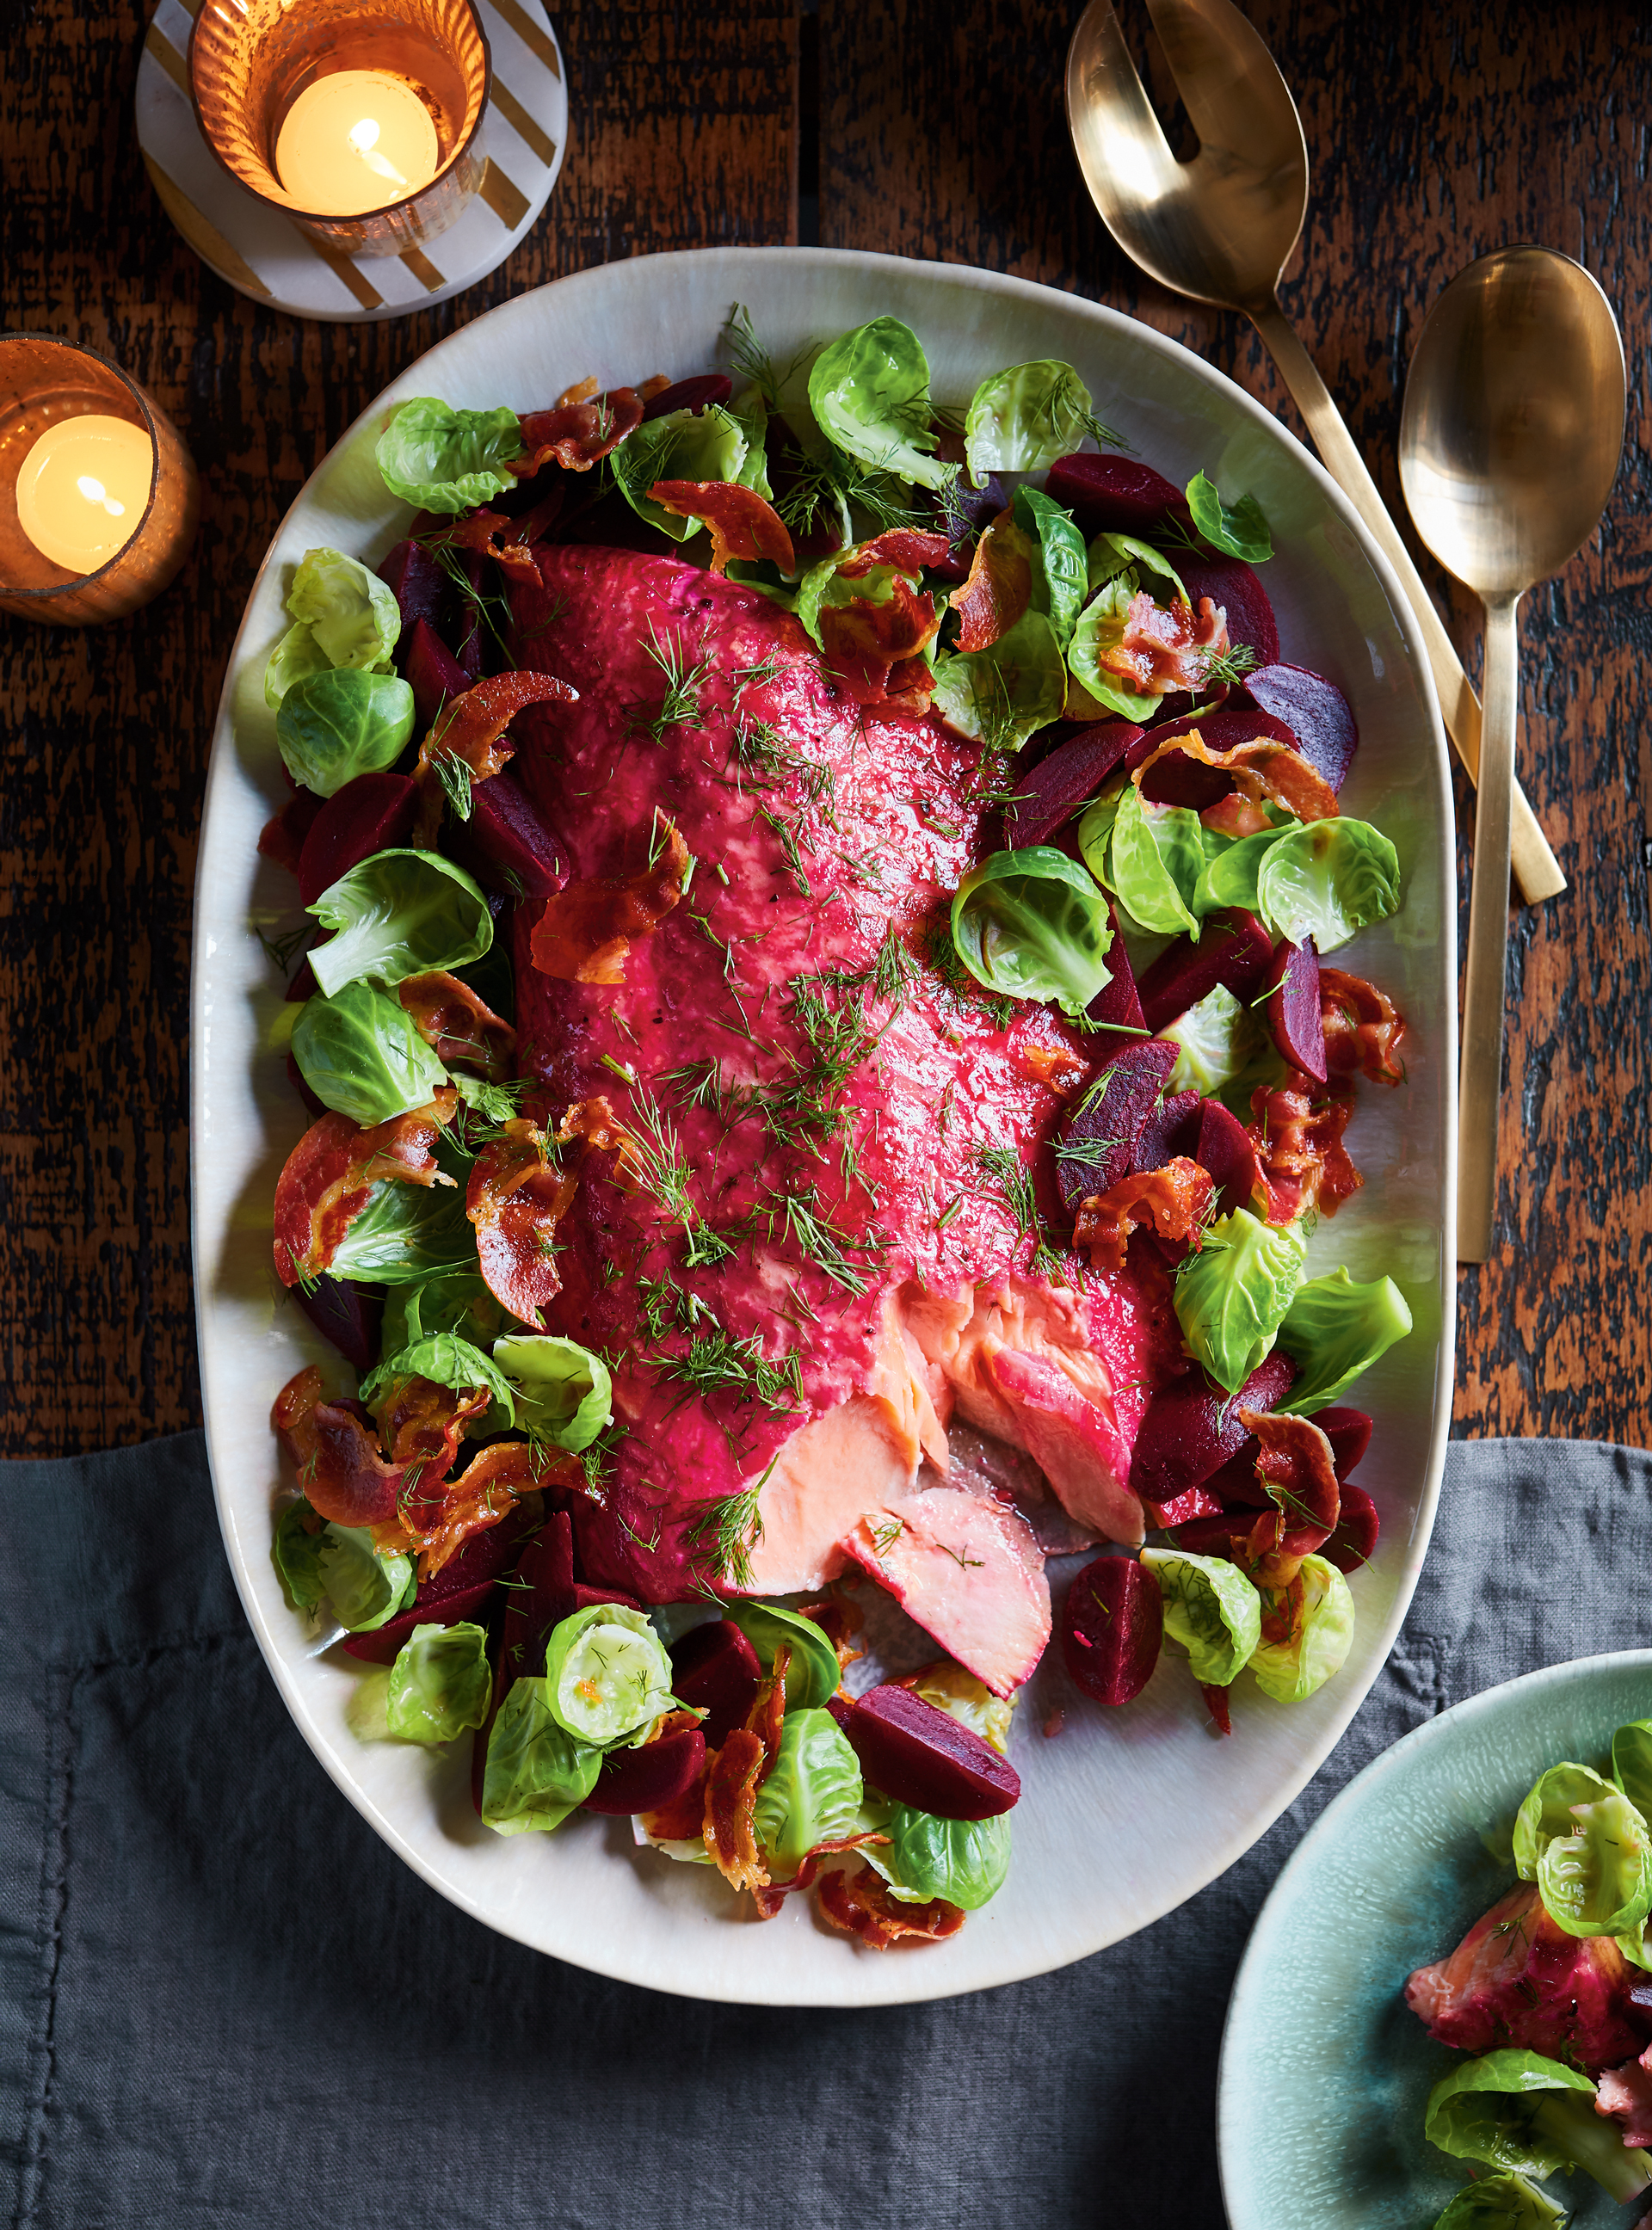 Baked Salmon with Beets, Brussels Sprouts and Pancetta